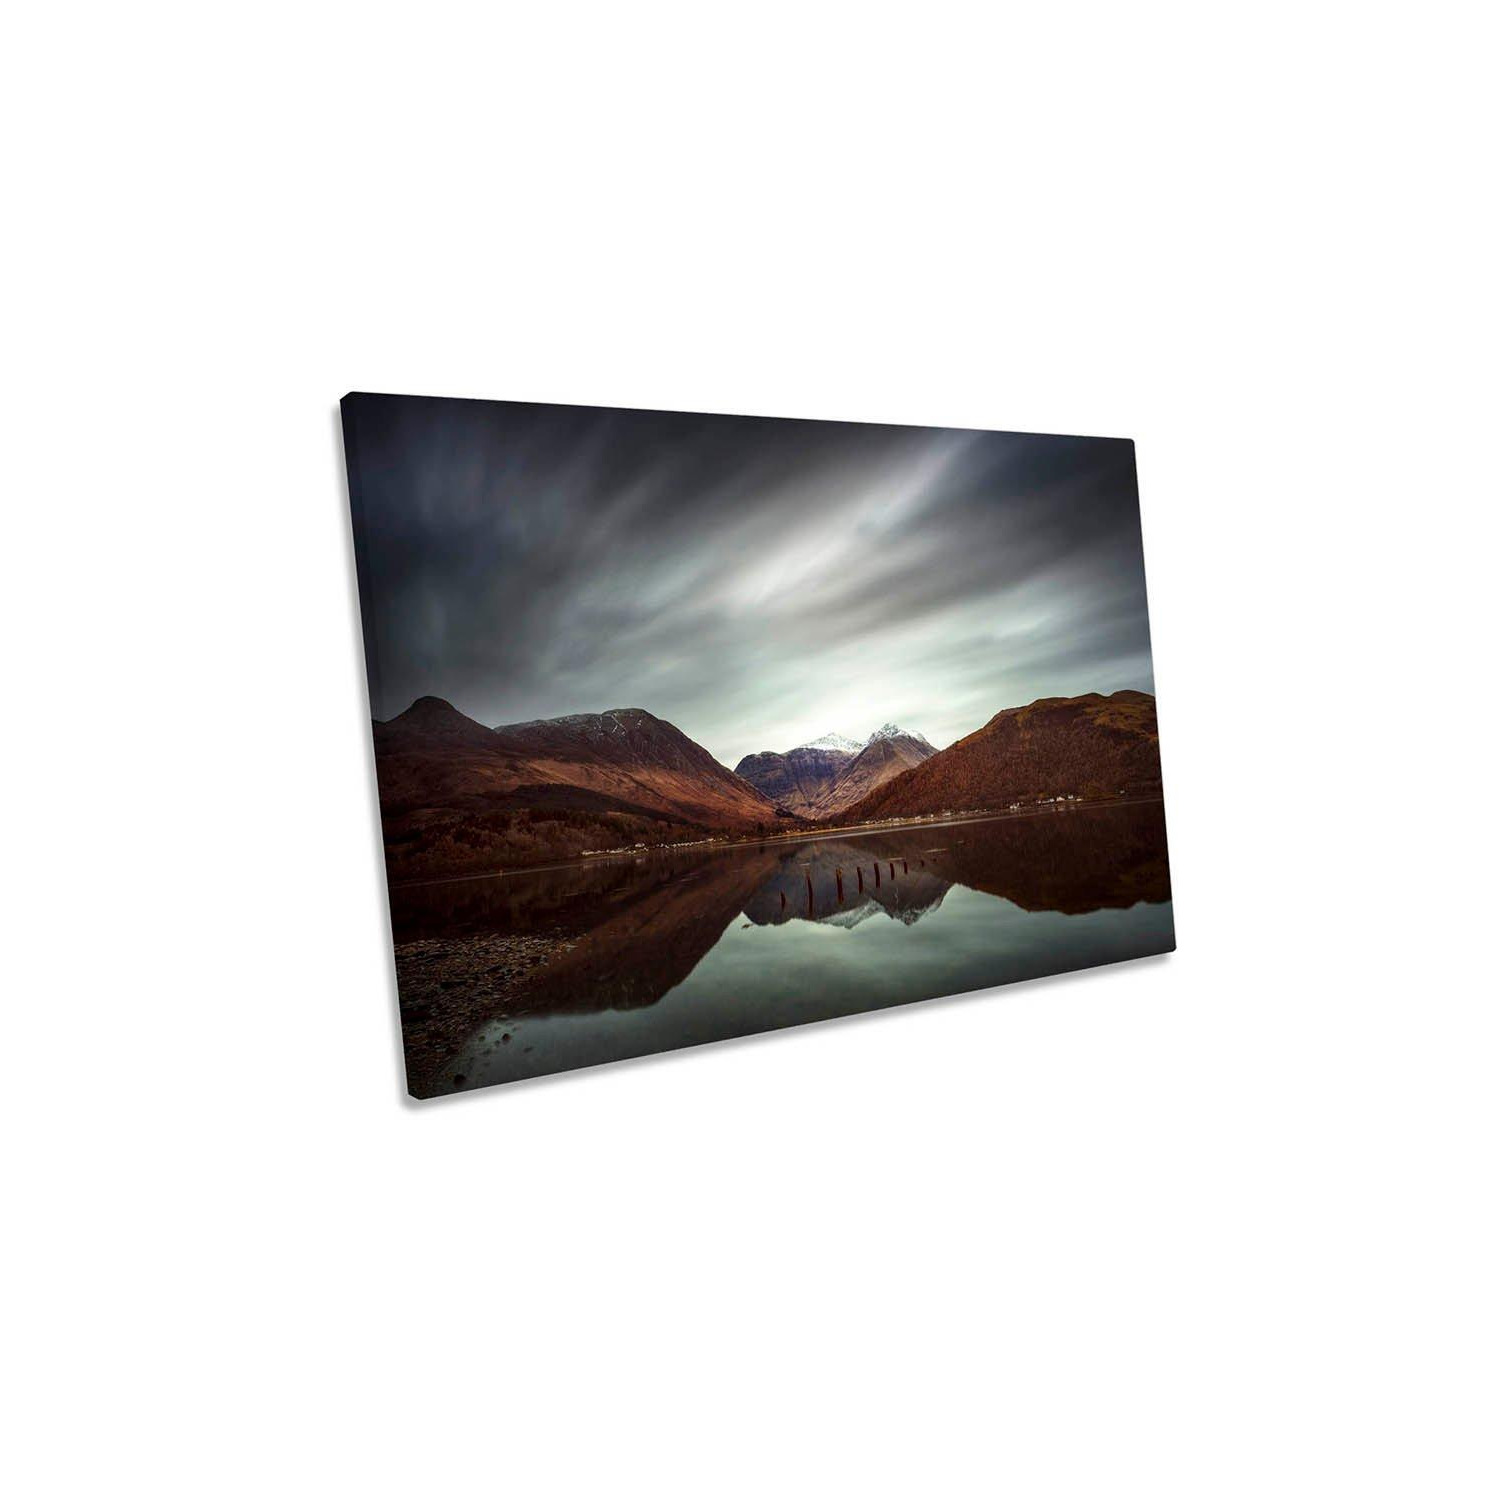 Clouds over Glencoe Scottish Highlands Canvas Wall Art Picture Print - image 1